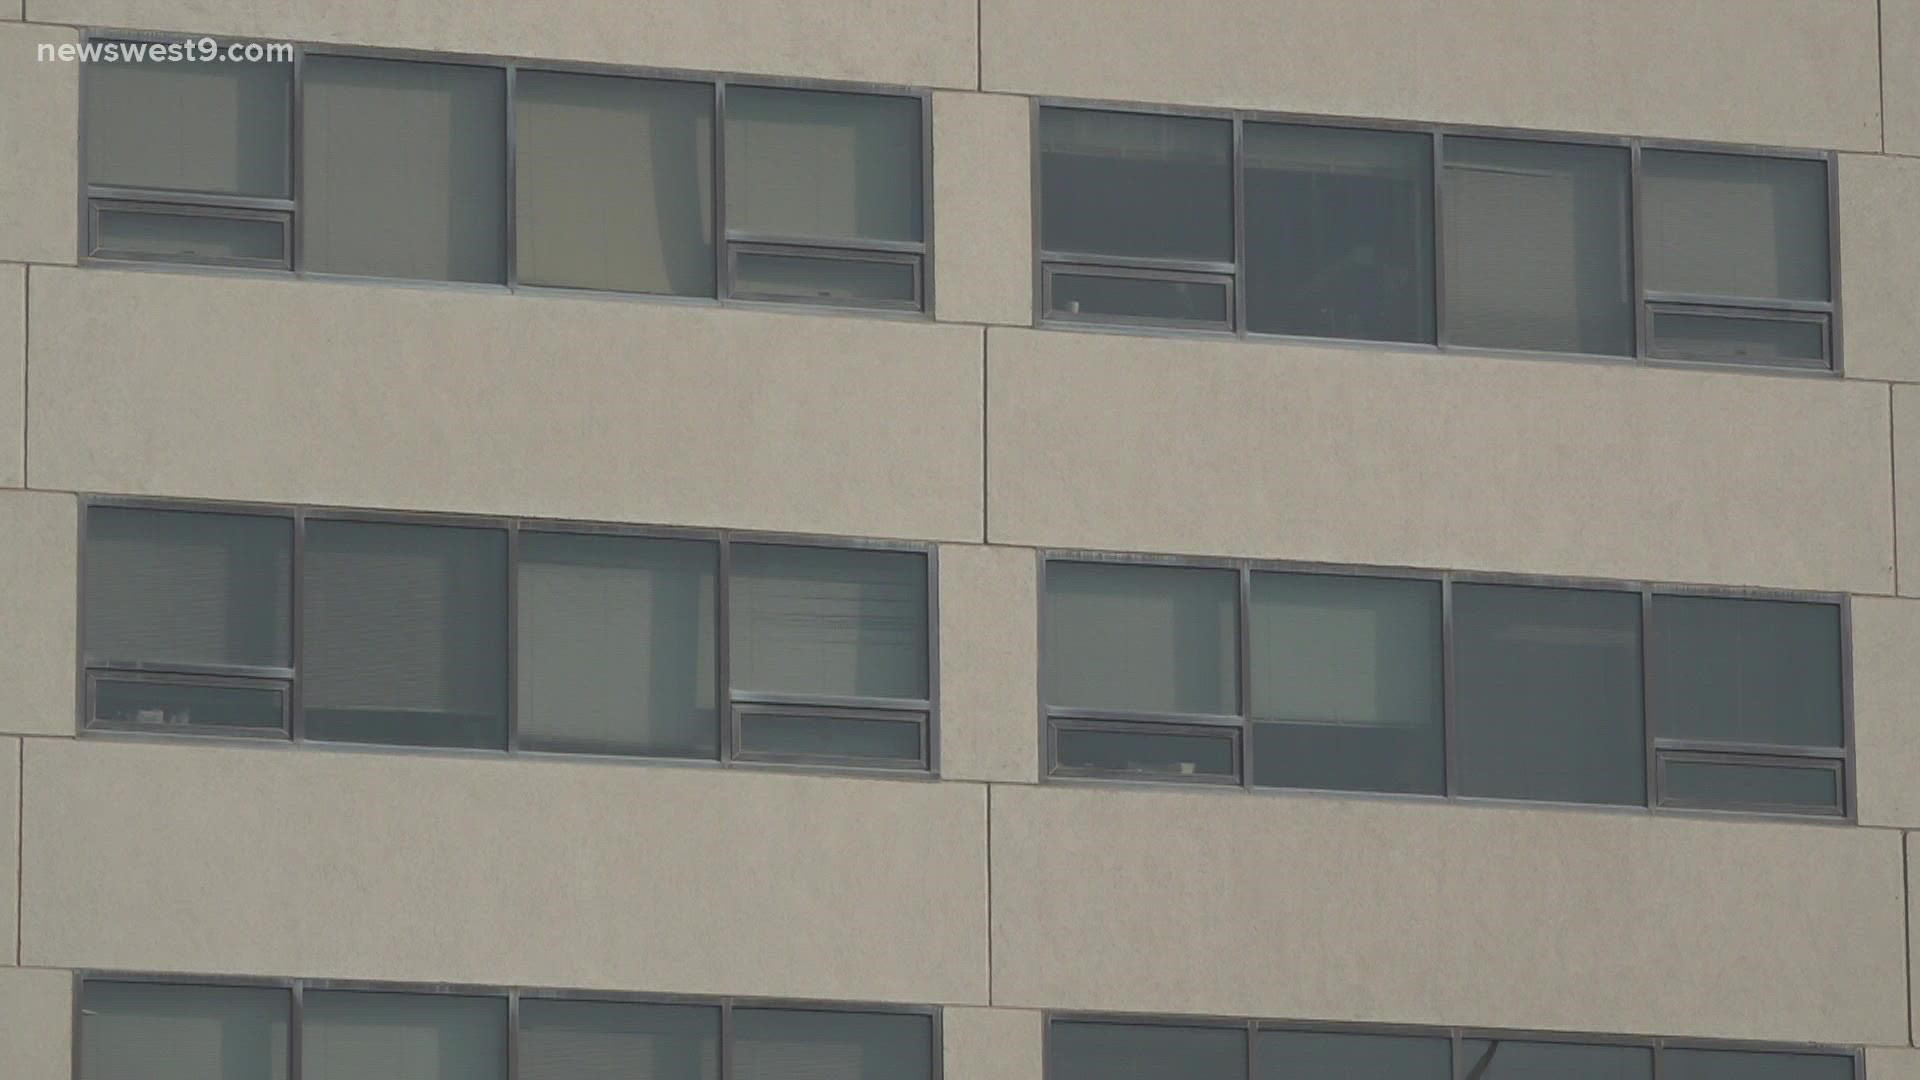 If you are ever around Medical Center Hospital in Odessa, take a second to look up and you’ll see open windows.